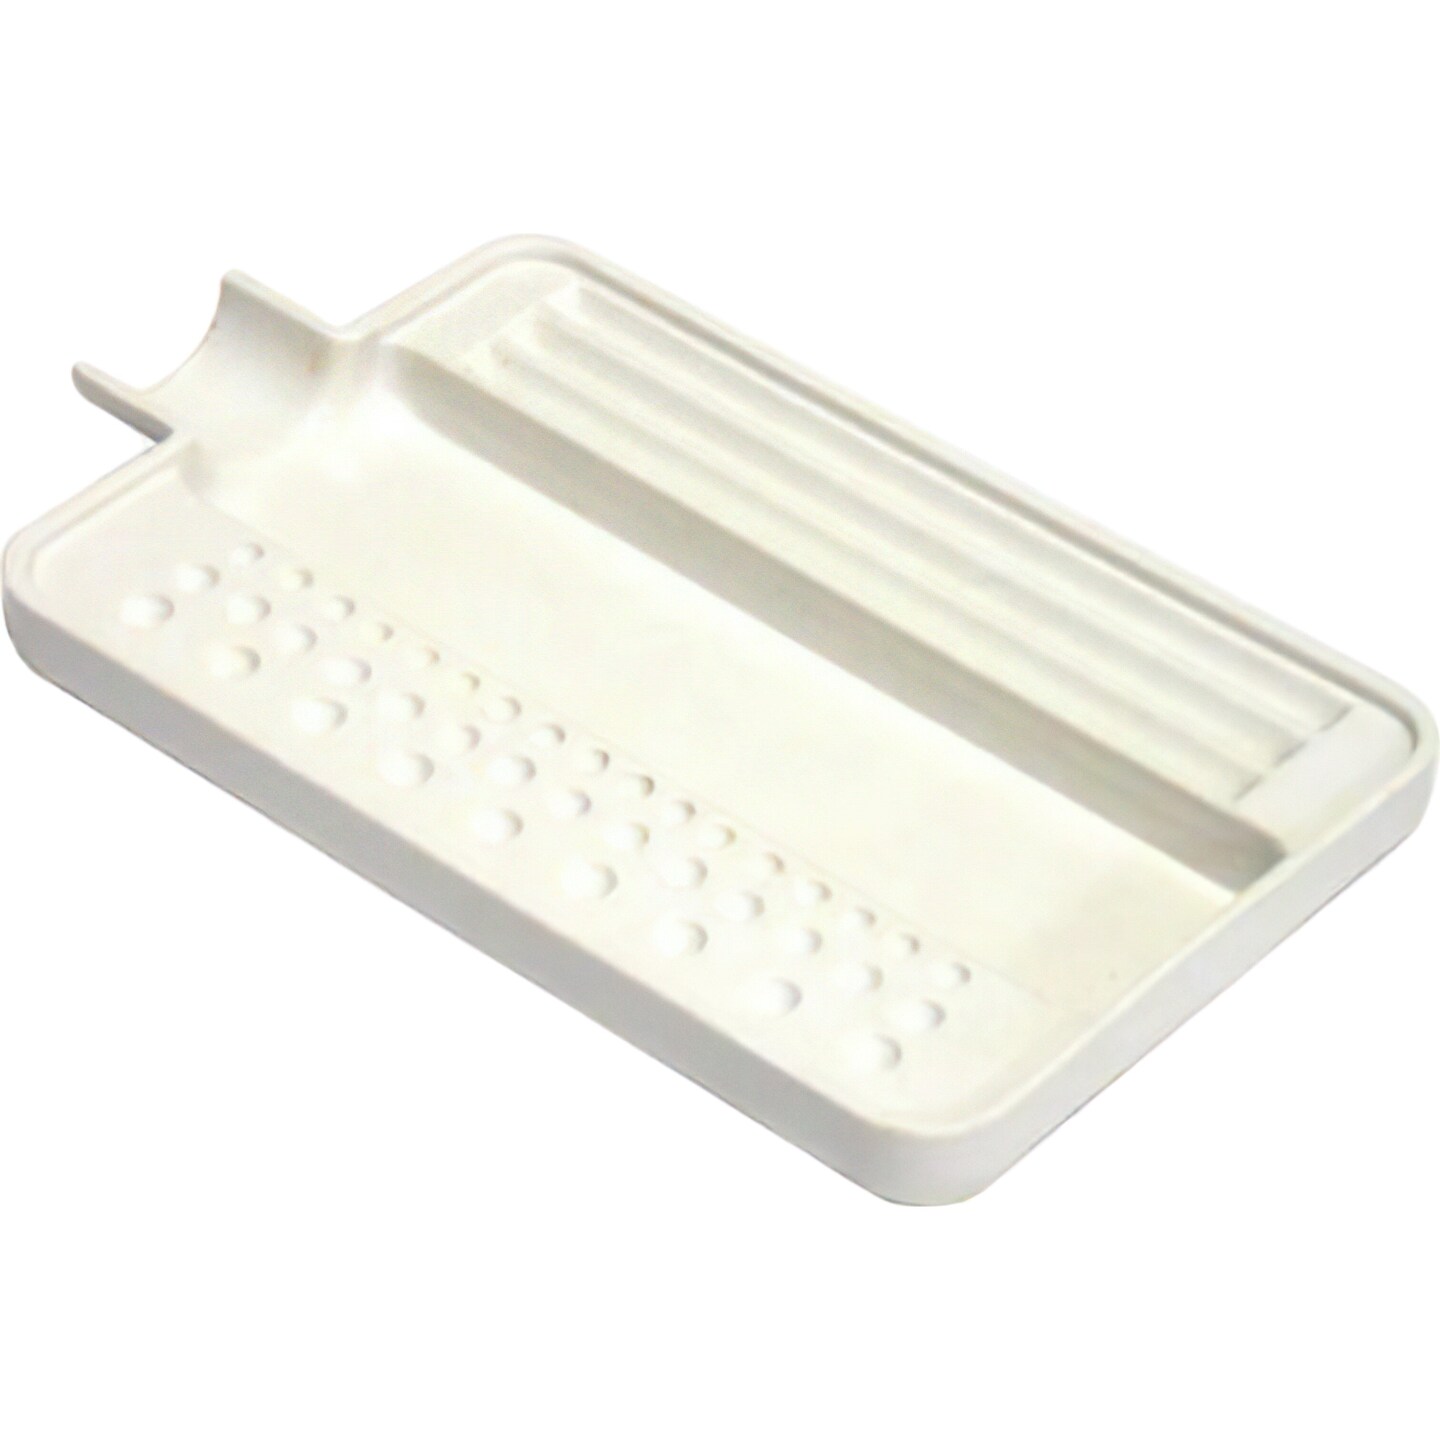 Bead Sorting Tray, White, 4-1/2 by 2-1/2 Inches, TRA-120.02